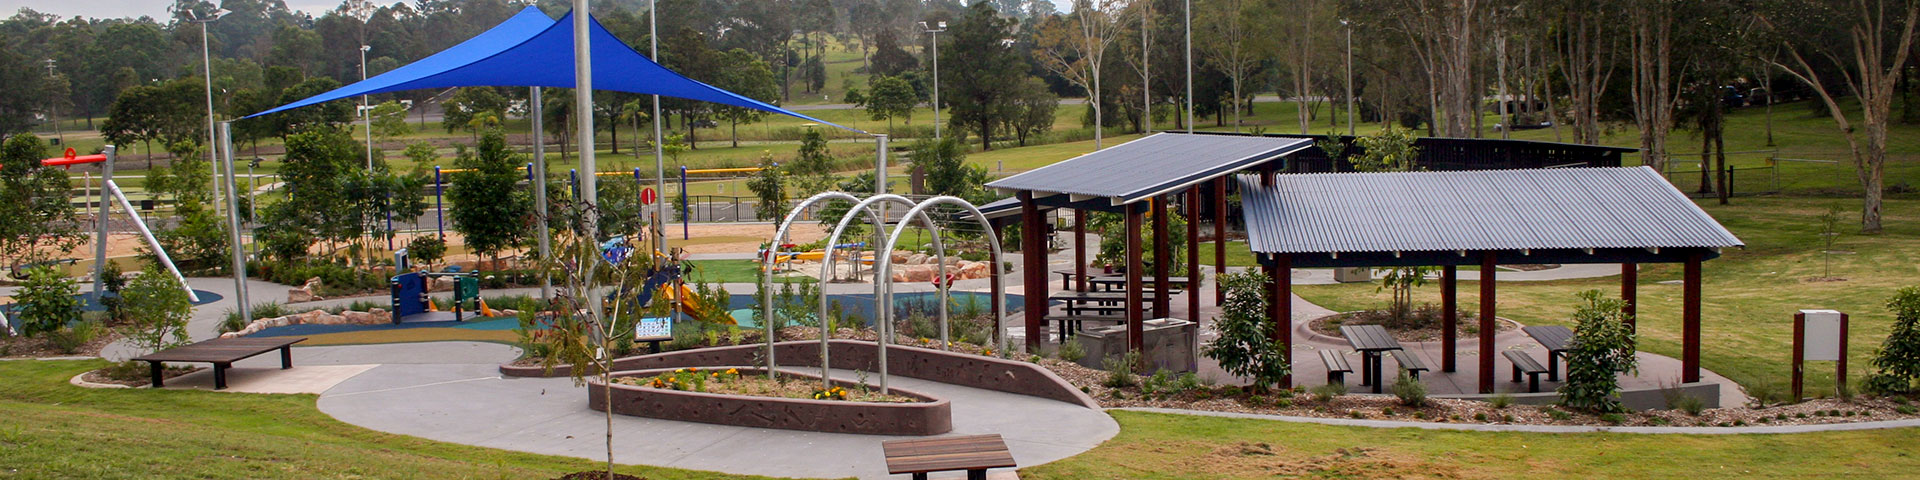 Lindsay triple park shelter design at Gympie All Ability Playground